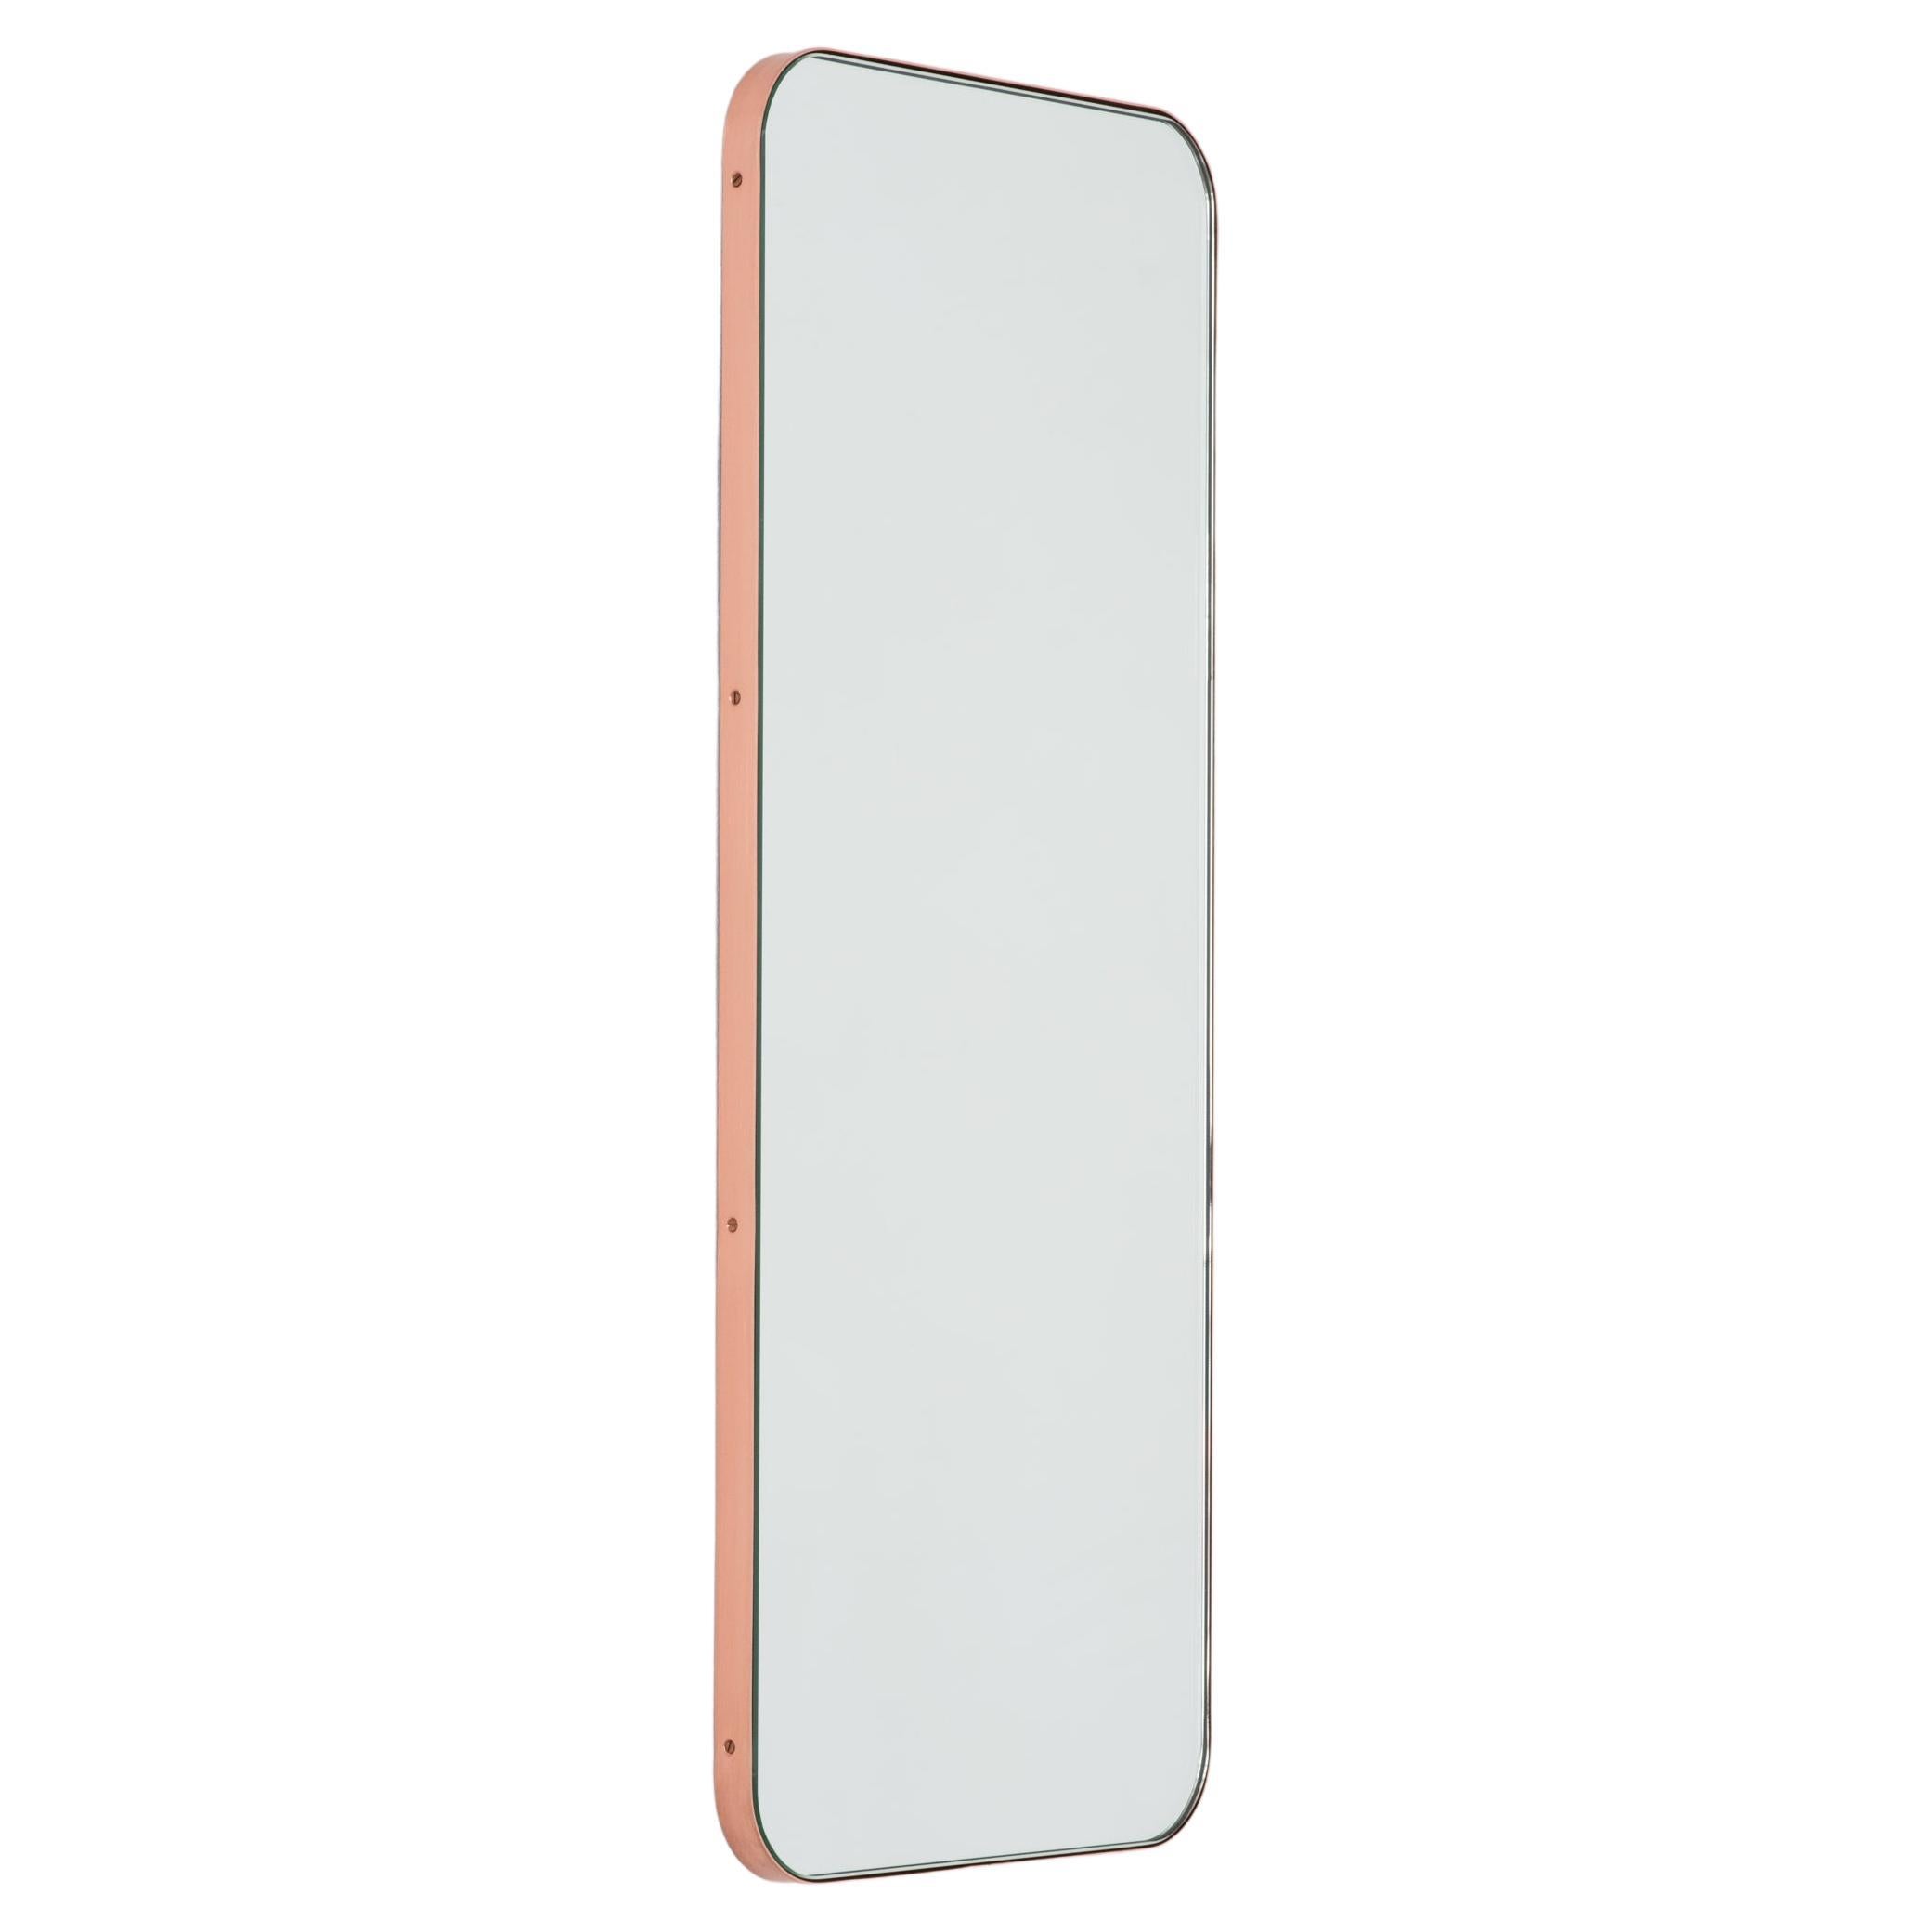 Quadris Rectangular Minimalist Mirror with a Copper Frame, Small For Sale